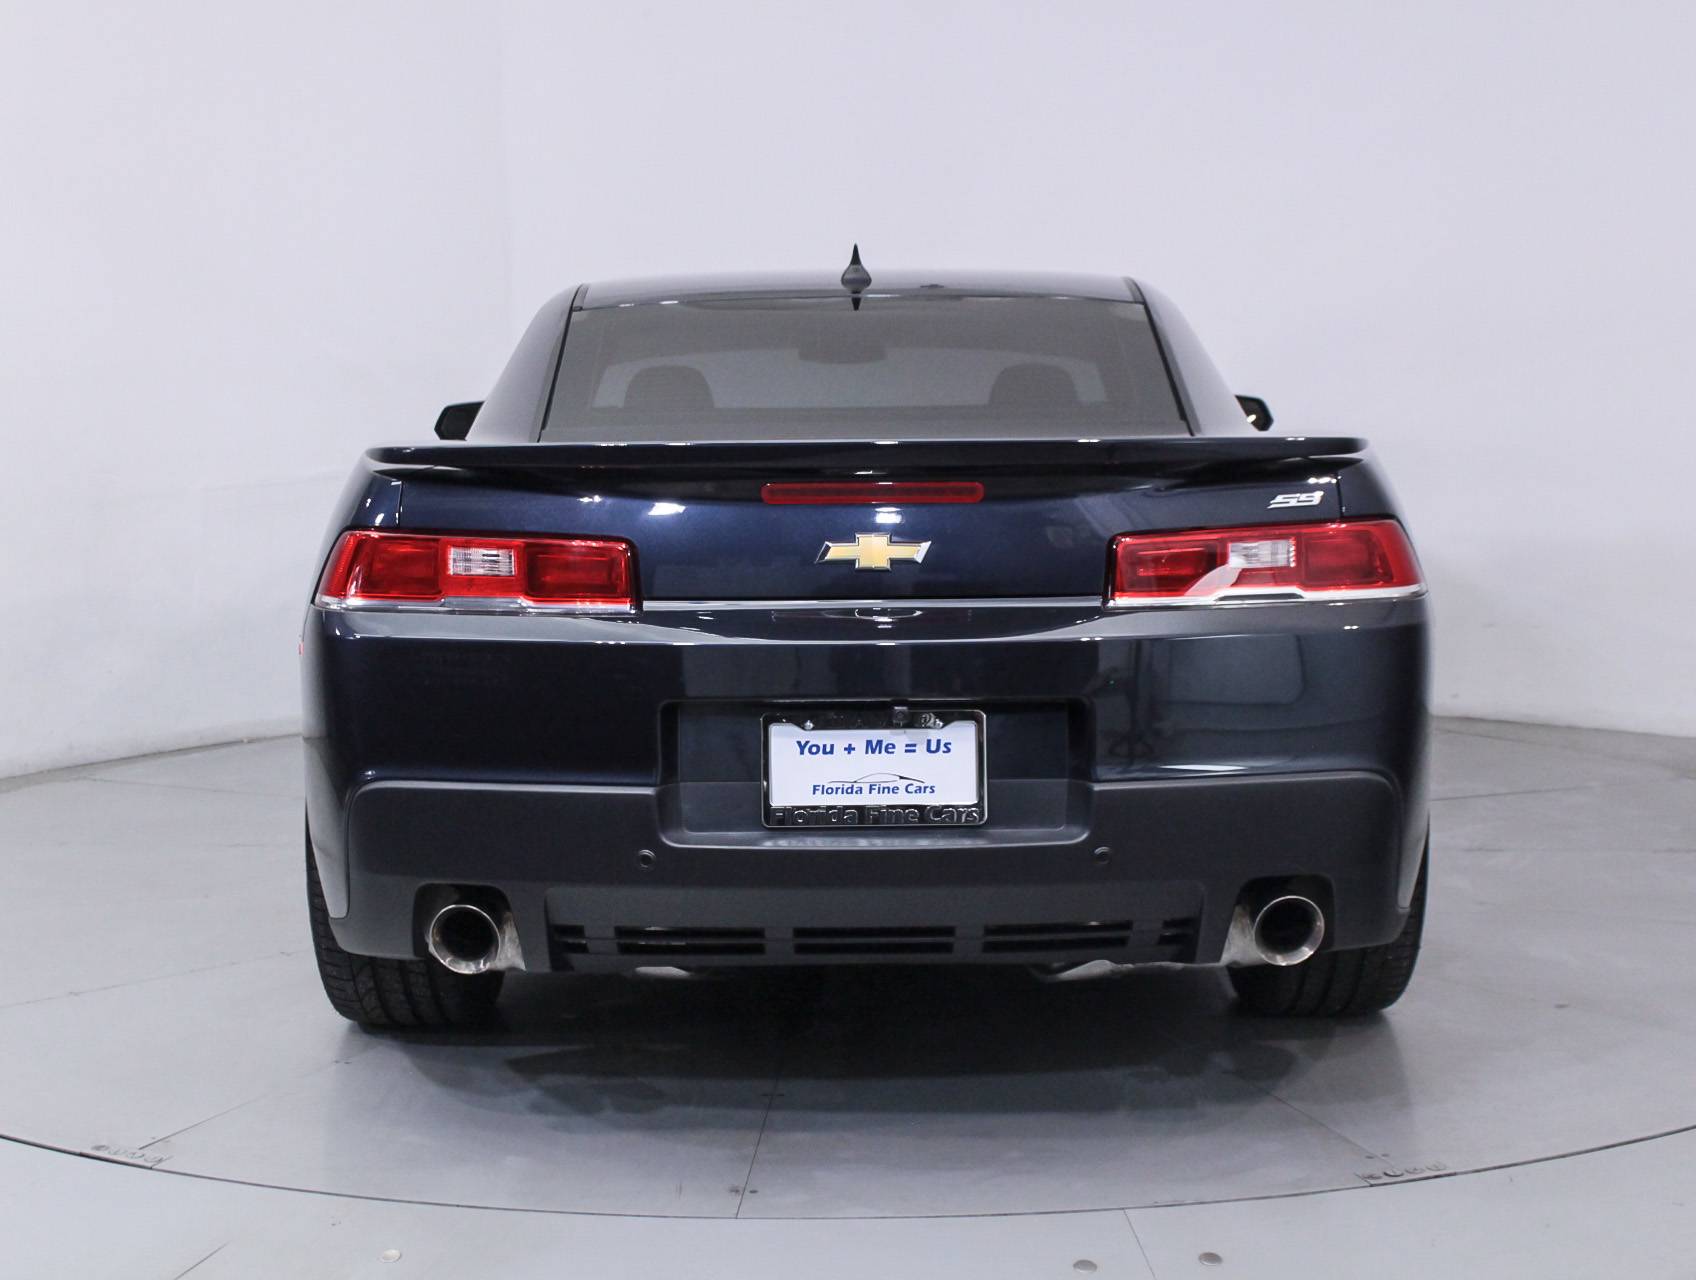 Florida Fine Cars - Used CHEVROLET CAMARO 2014 WEST PALM 1SS